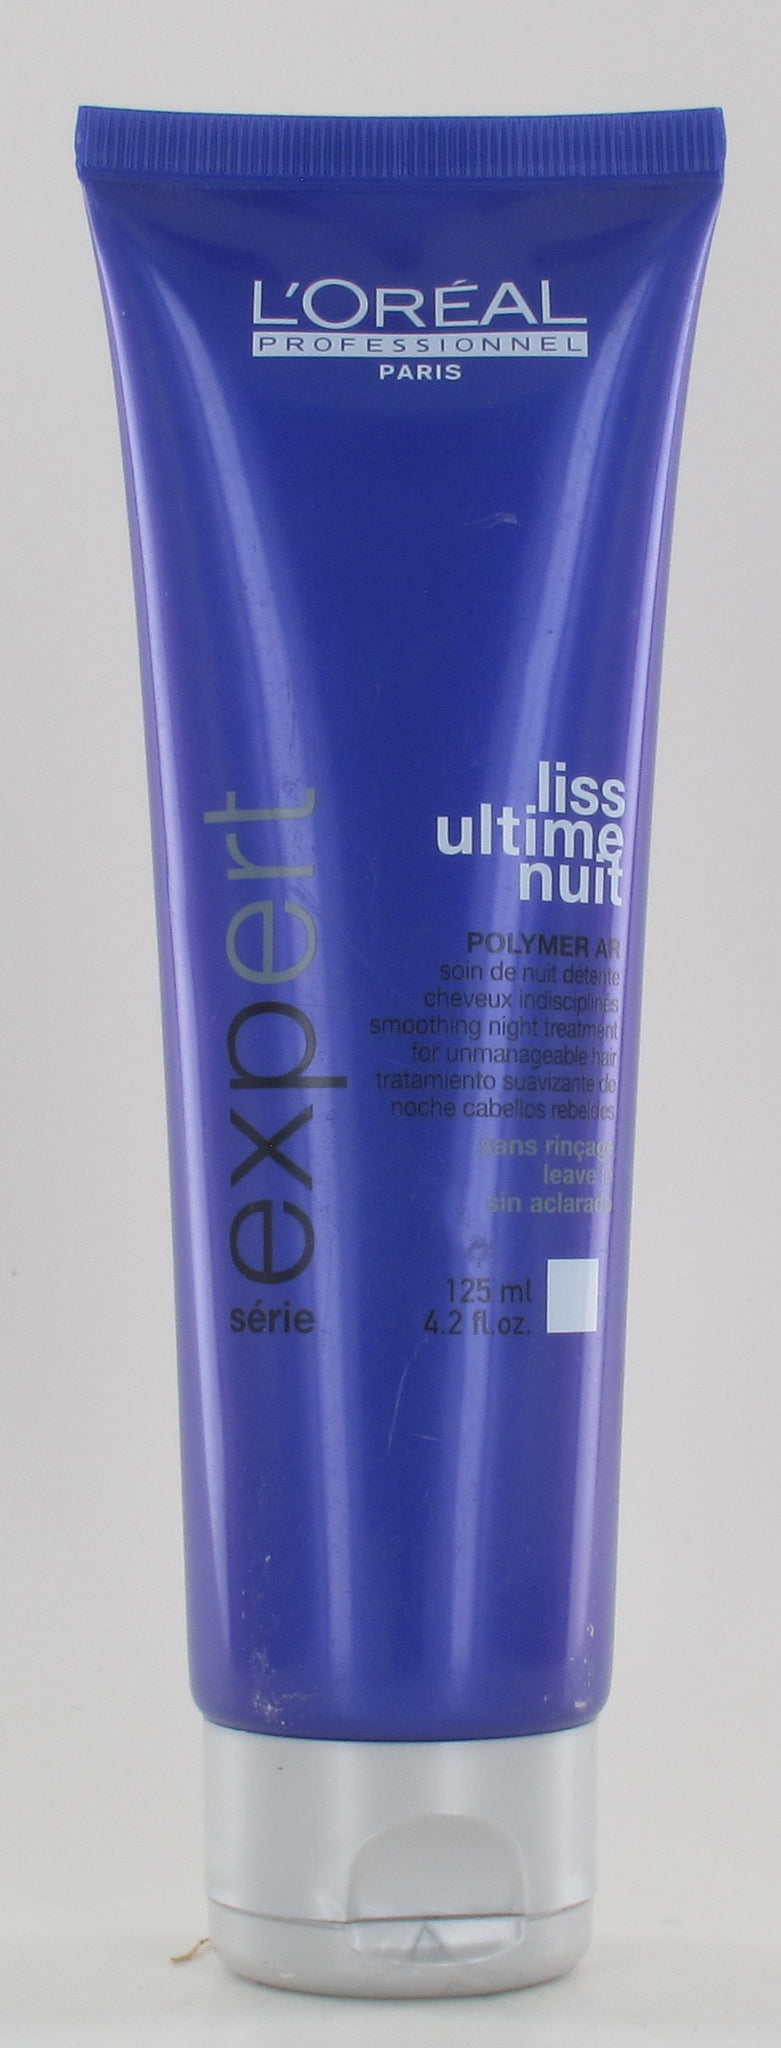 Loreal Liss Ultime Nuit Polymer AR Smoothing Night Treatment 4.2 Oz